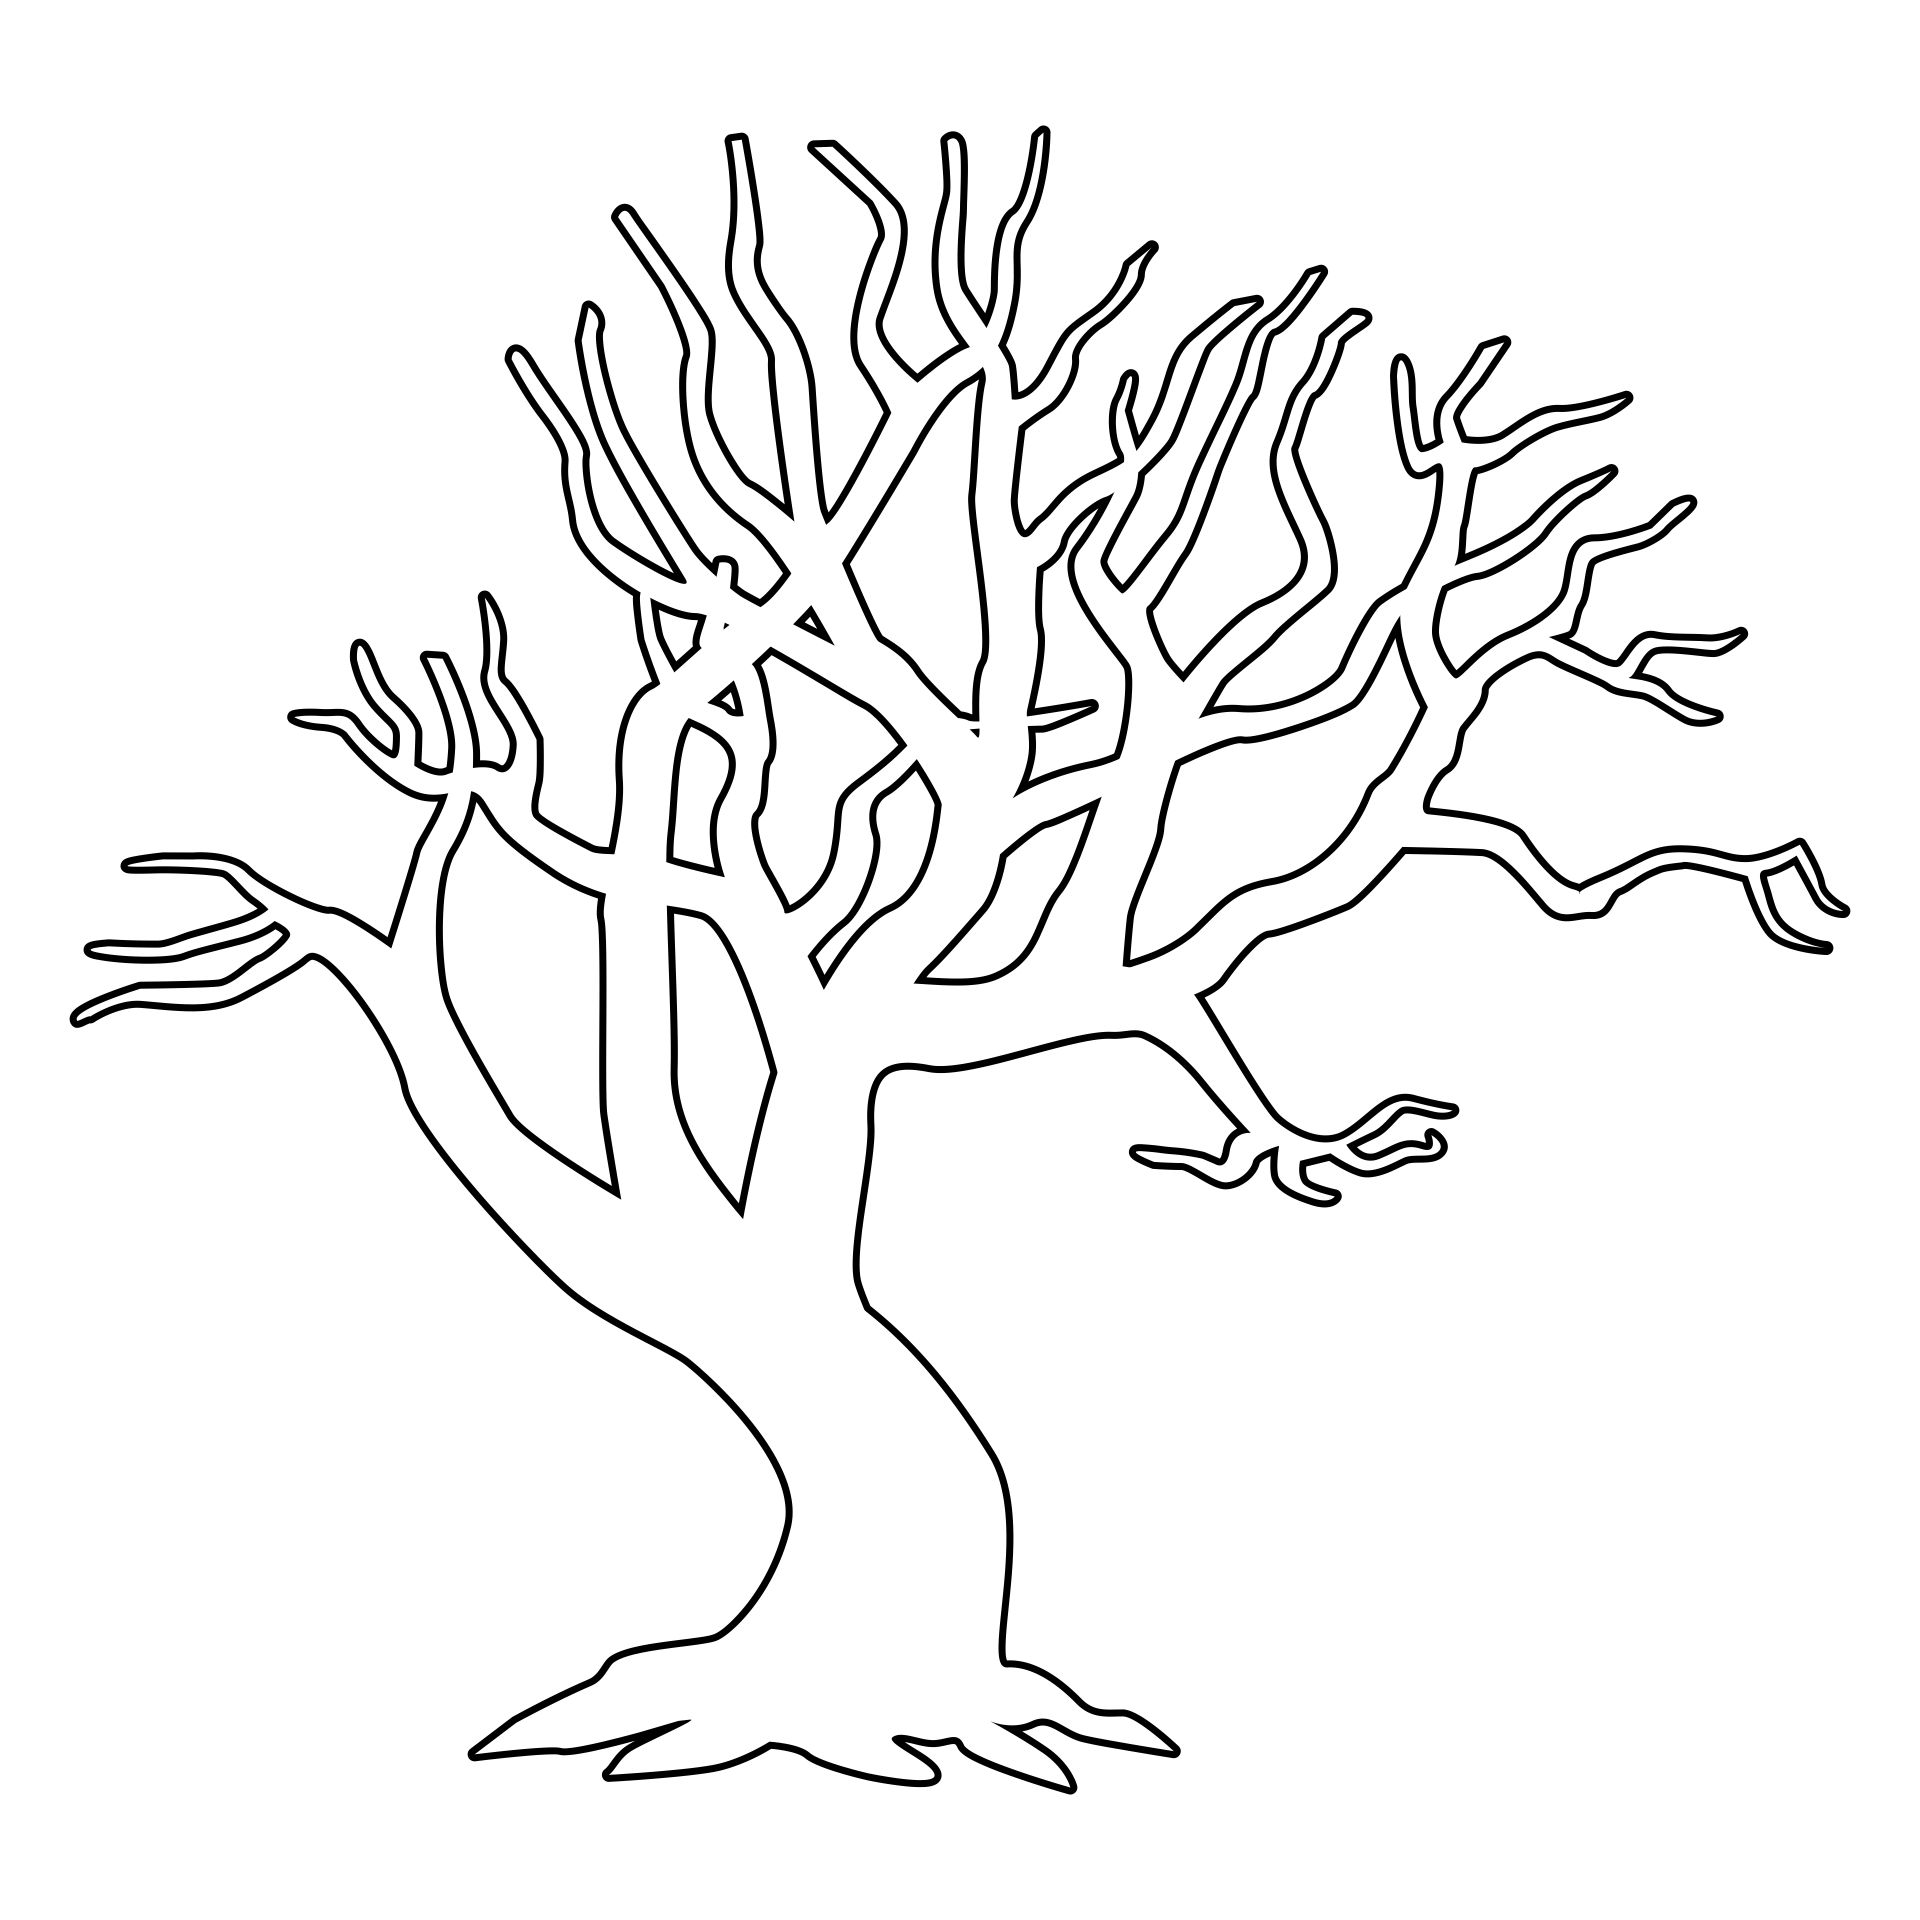 Printable Tree without Leaves Coloring Page